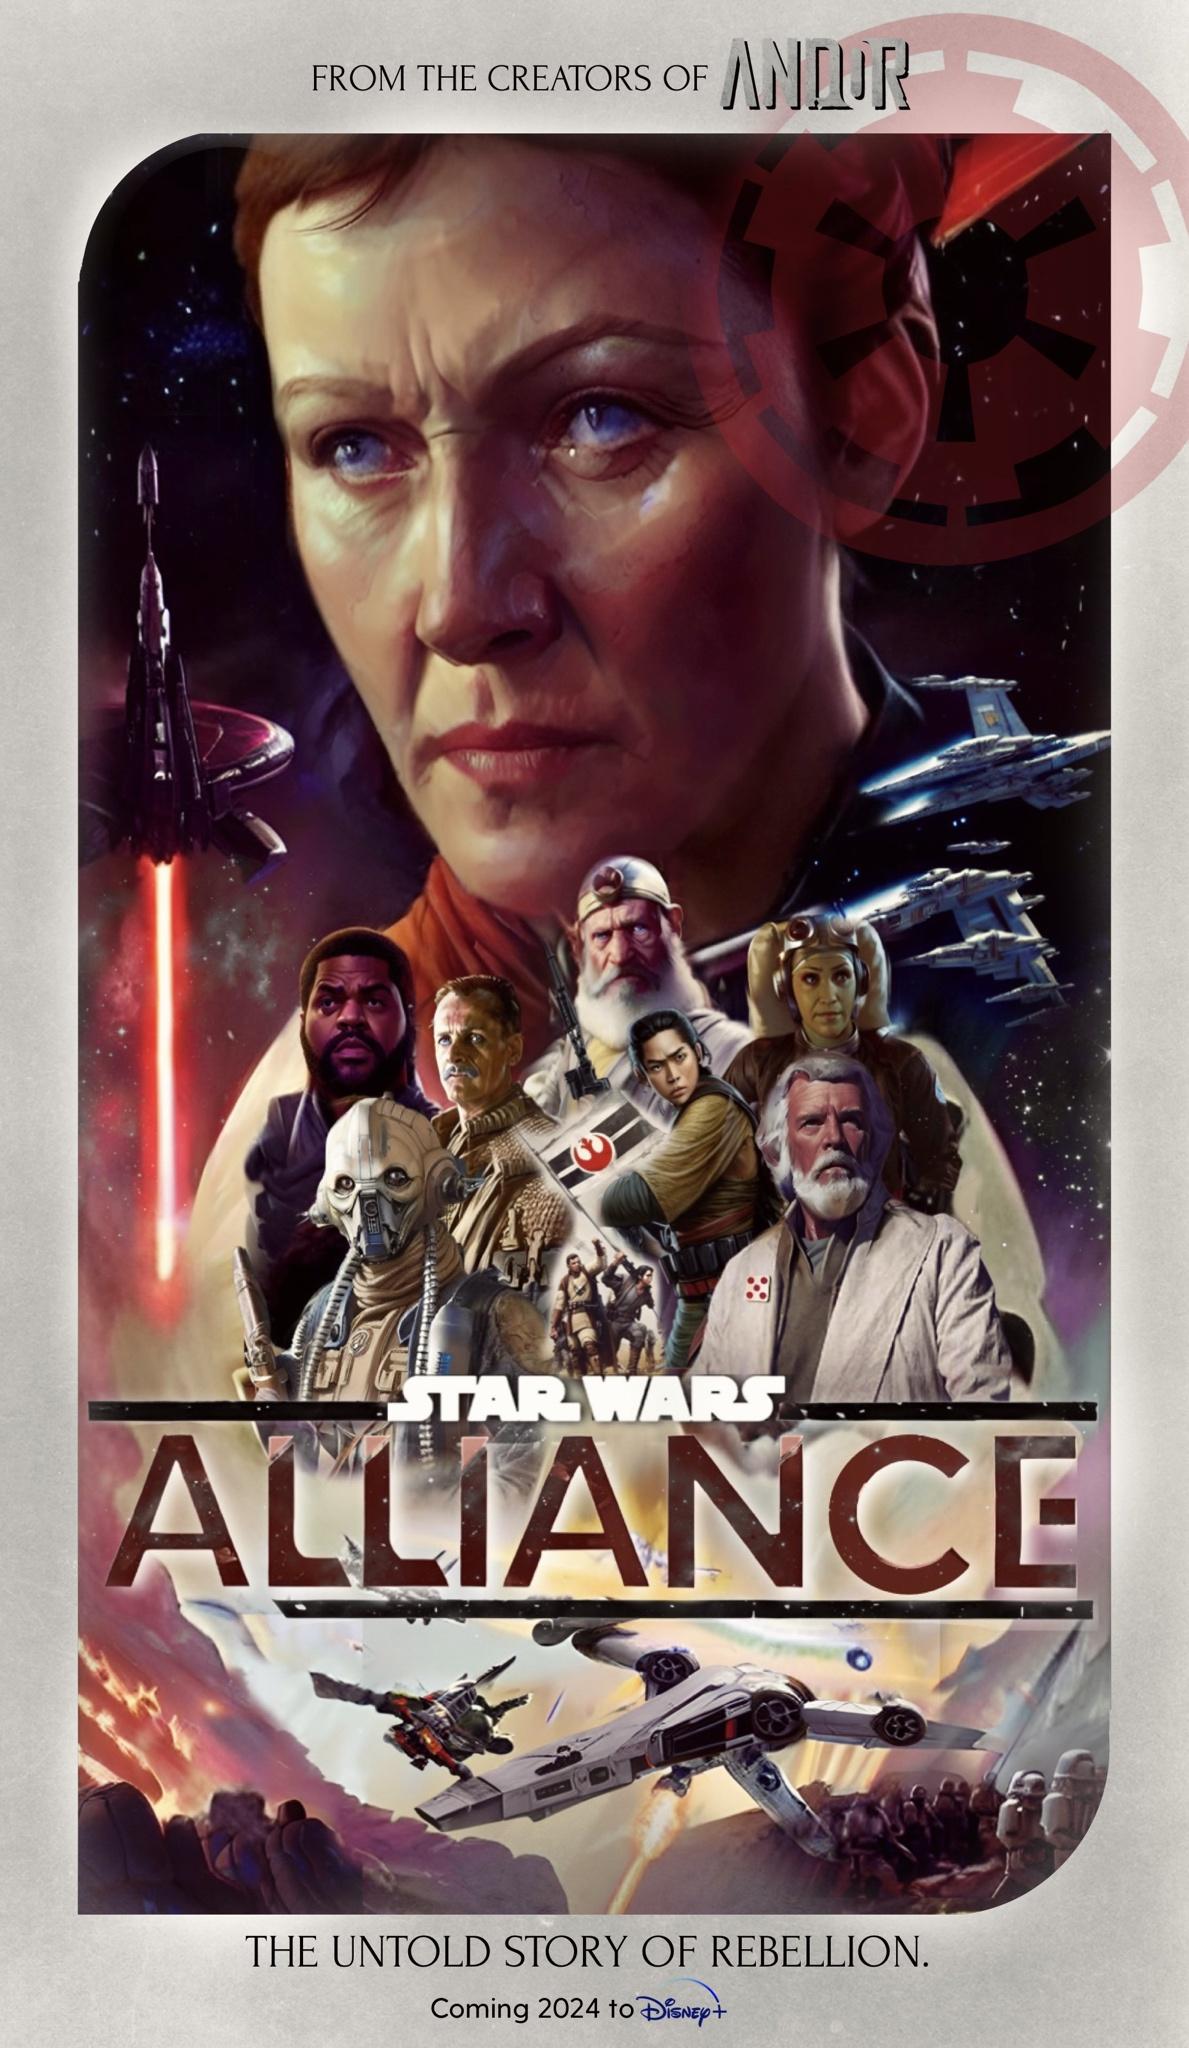 ALLIANCE, from the creators of “Andor”, tells the untold memoir of the Stand up war in opposition to the Empire, from Yavin to Endor. Starting up Genevieve O’Reiley as Mon Mothma.